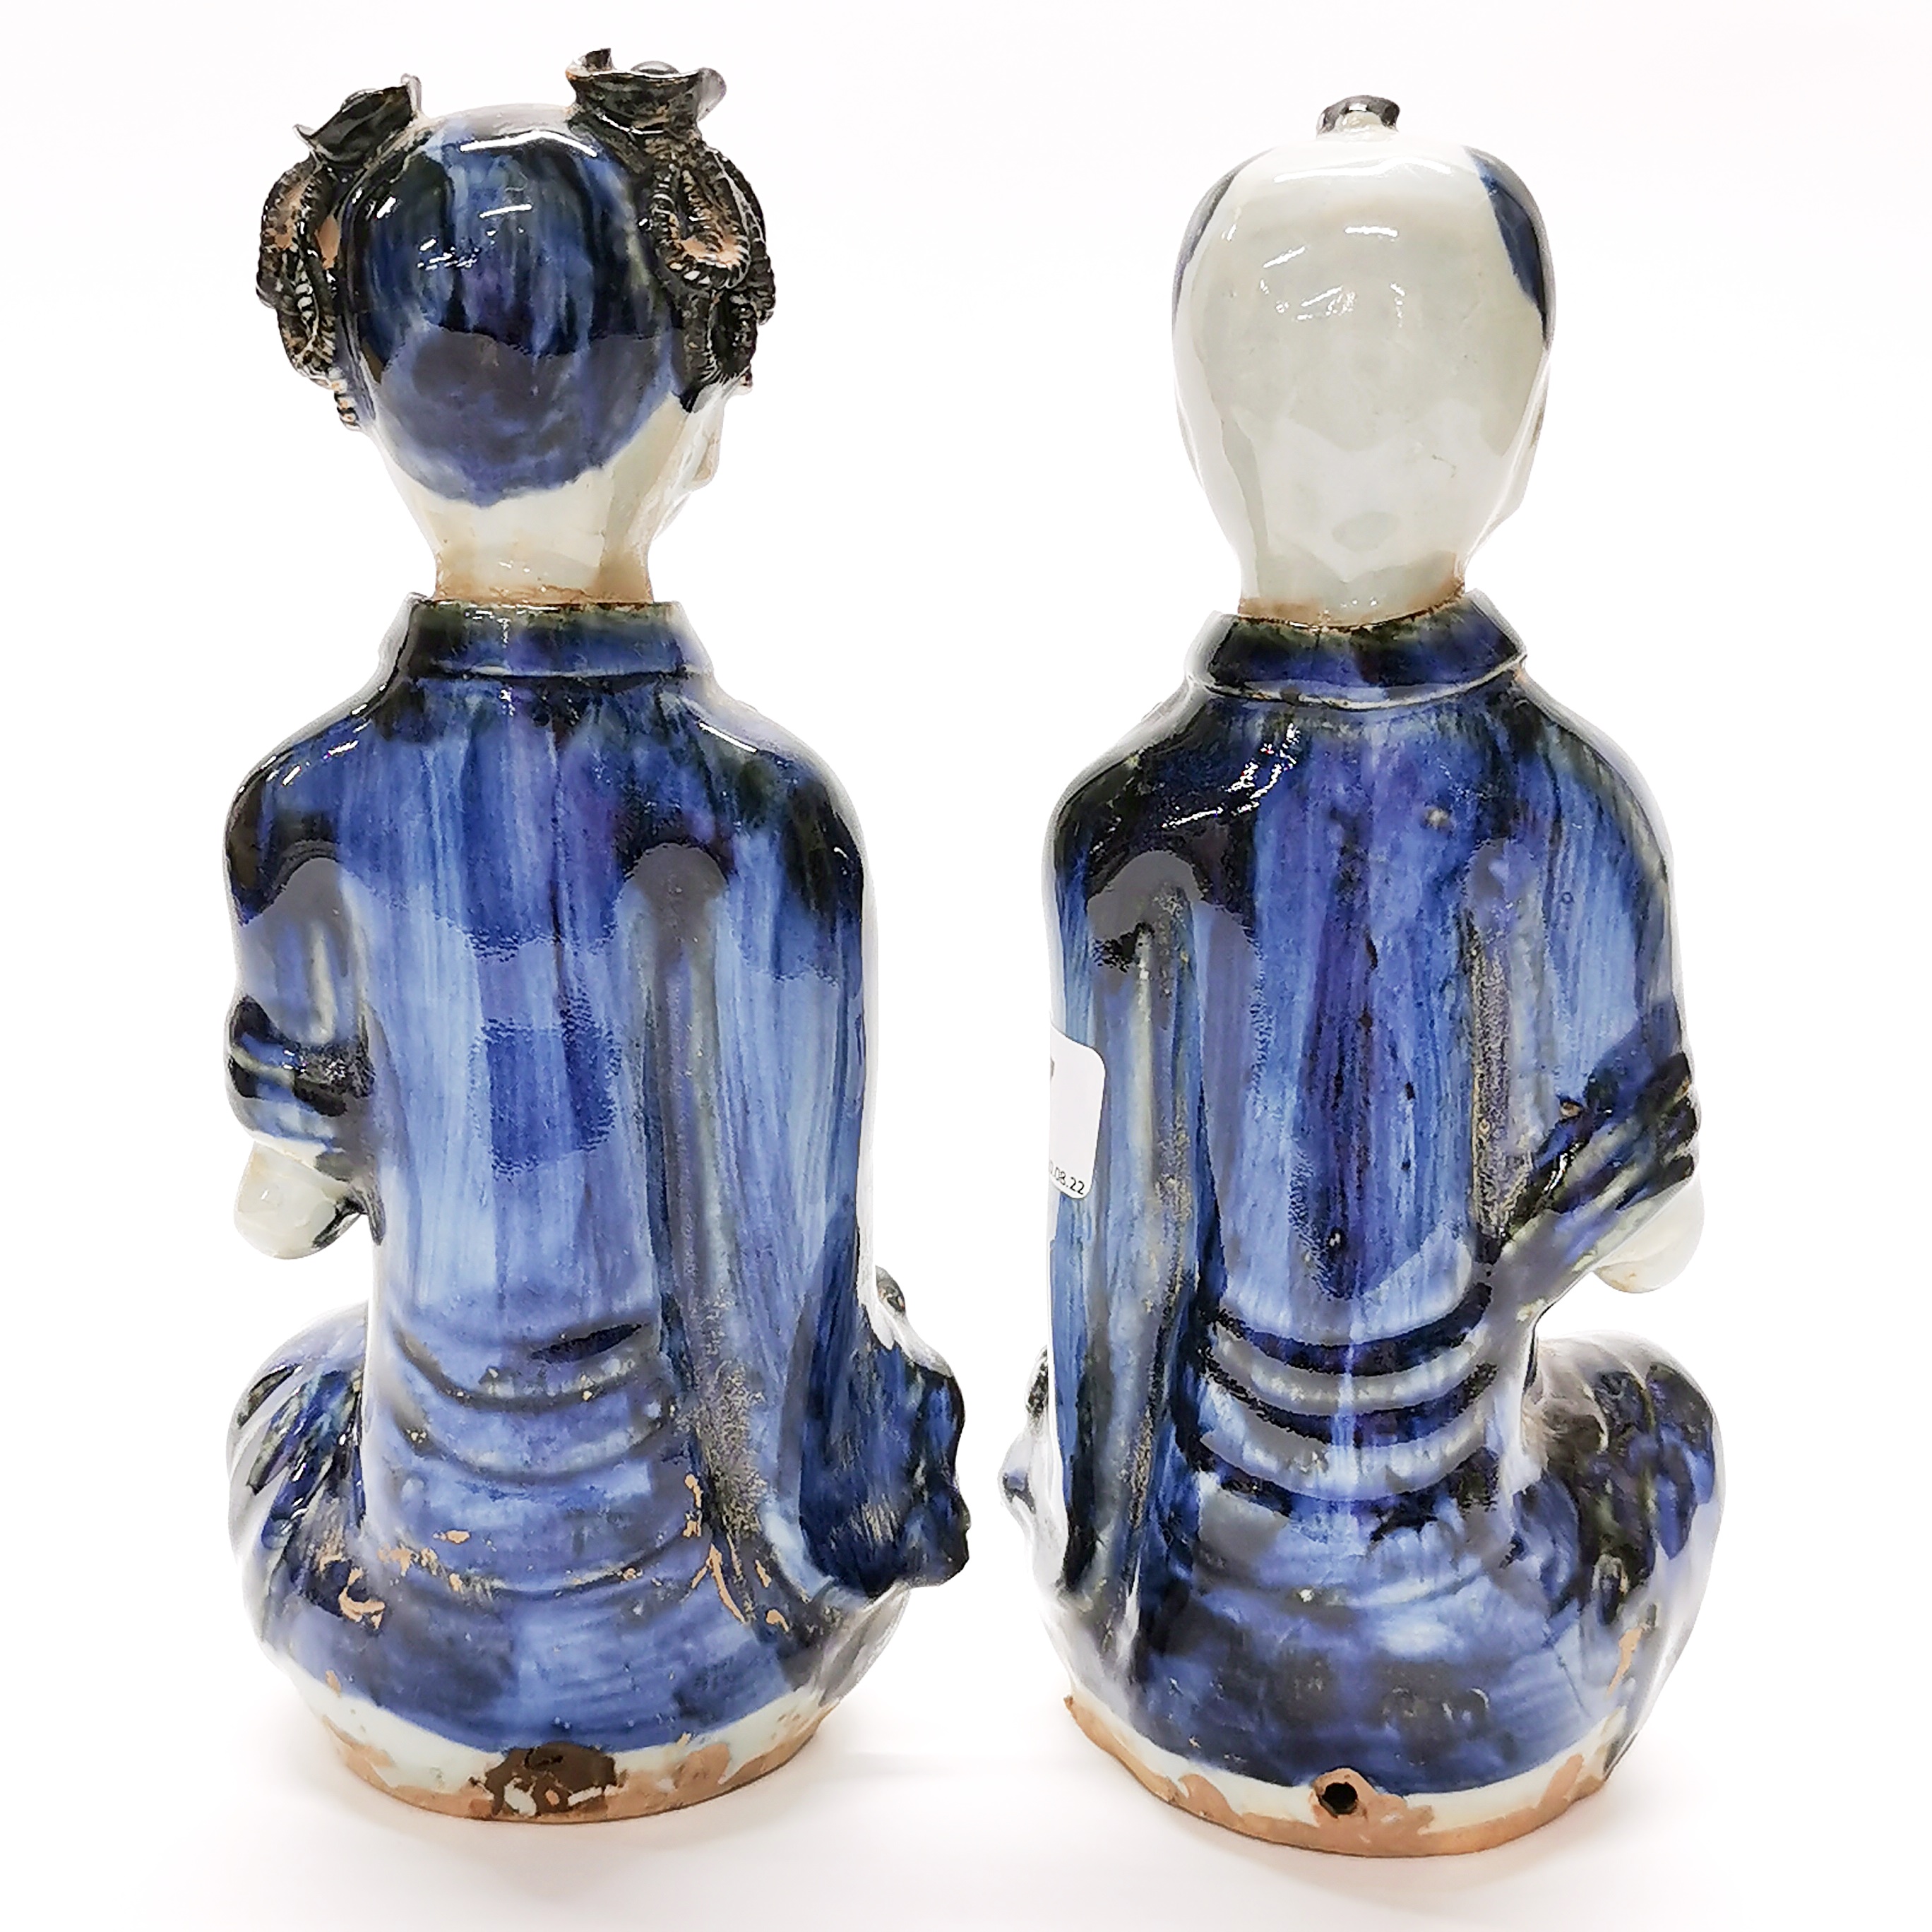 A pair of interesting Chinese glazed handmade porcelain figures of a boy and a girl, H. 23cm. - Image 3 of 4